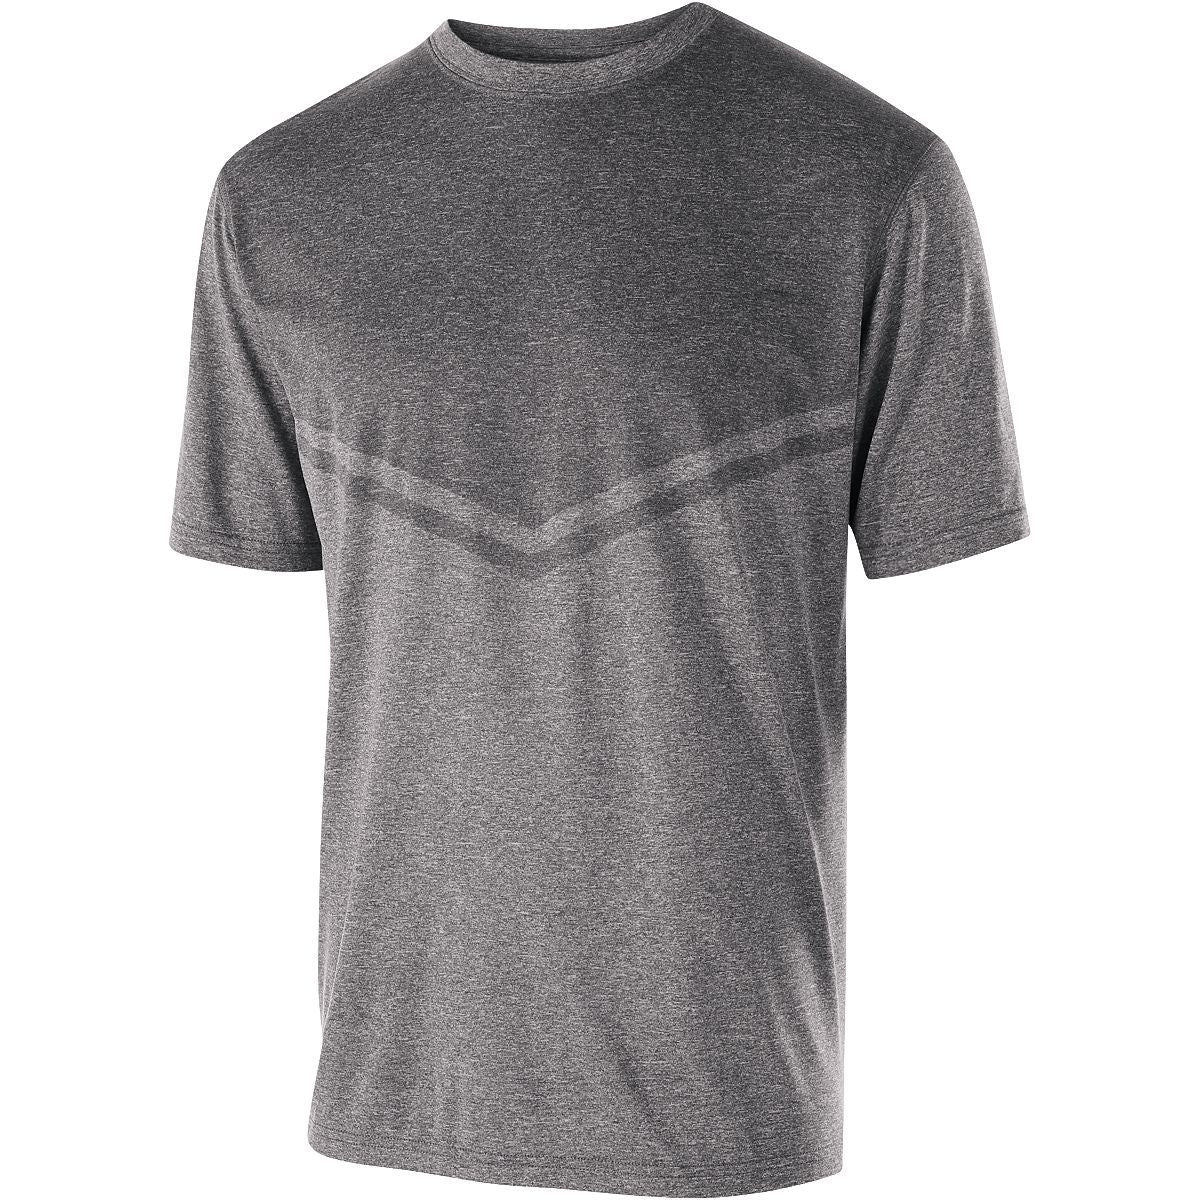 Holloway Seismic Tee in Graphite Heather  -Part of the Adult, Adult-Tee-Shirt, T-Shirts, Holloway, Shirts product lines at KanaleyCreations.com